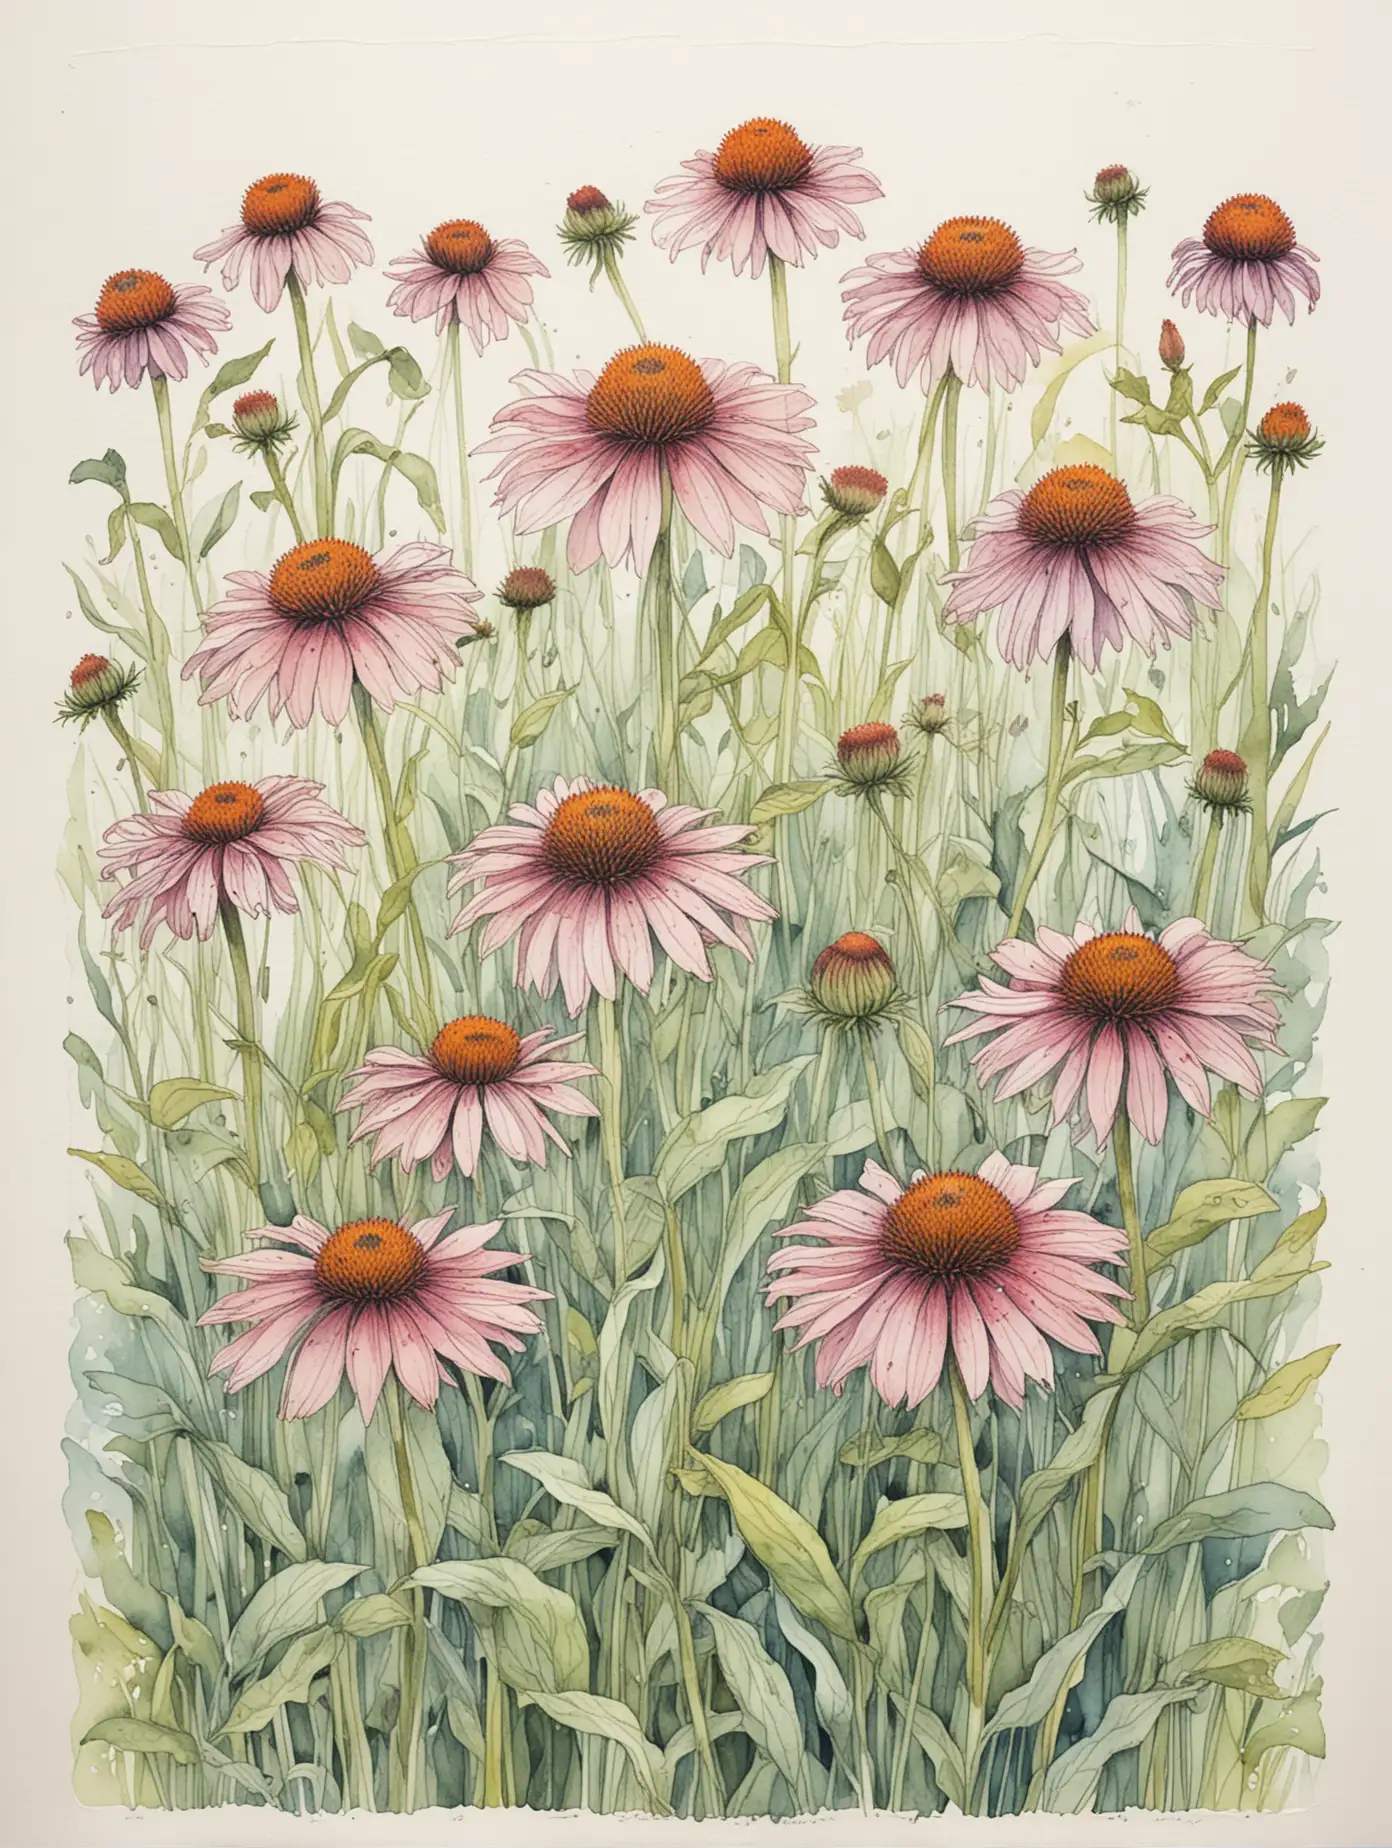 Simple water color and line drawing of a field of echinacea

